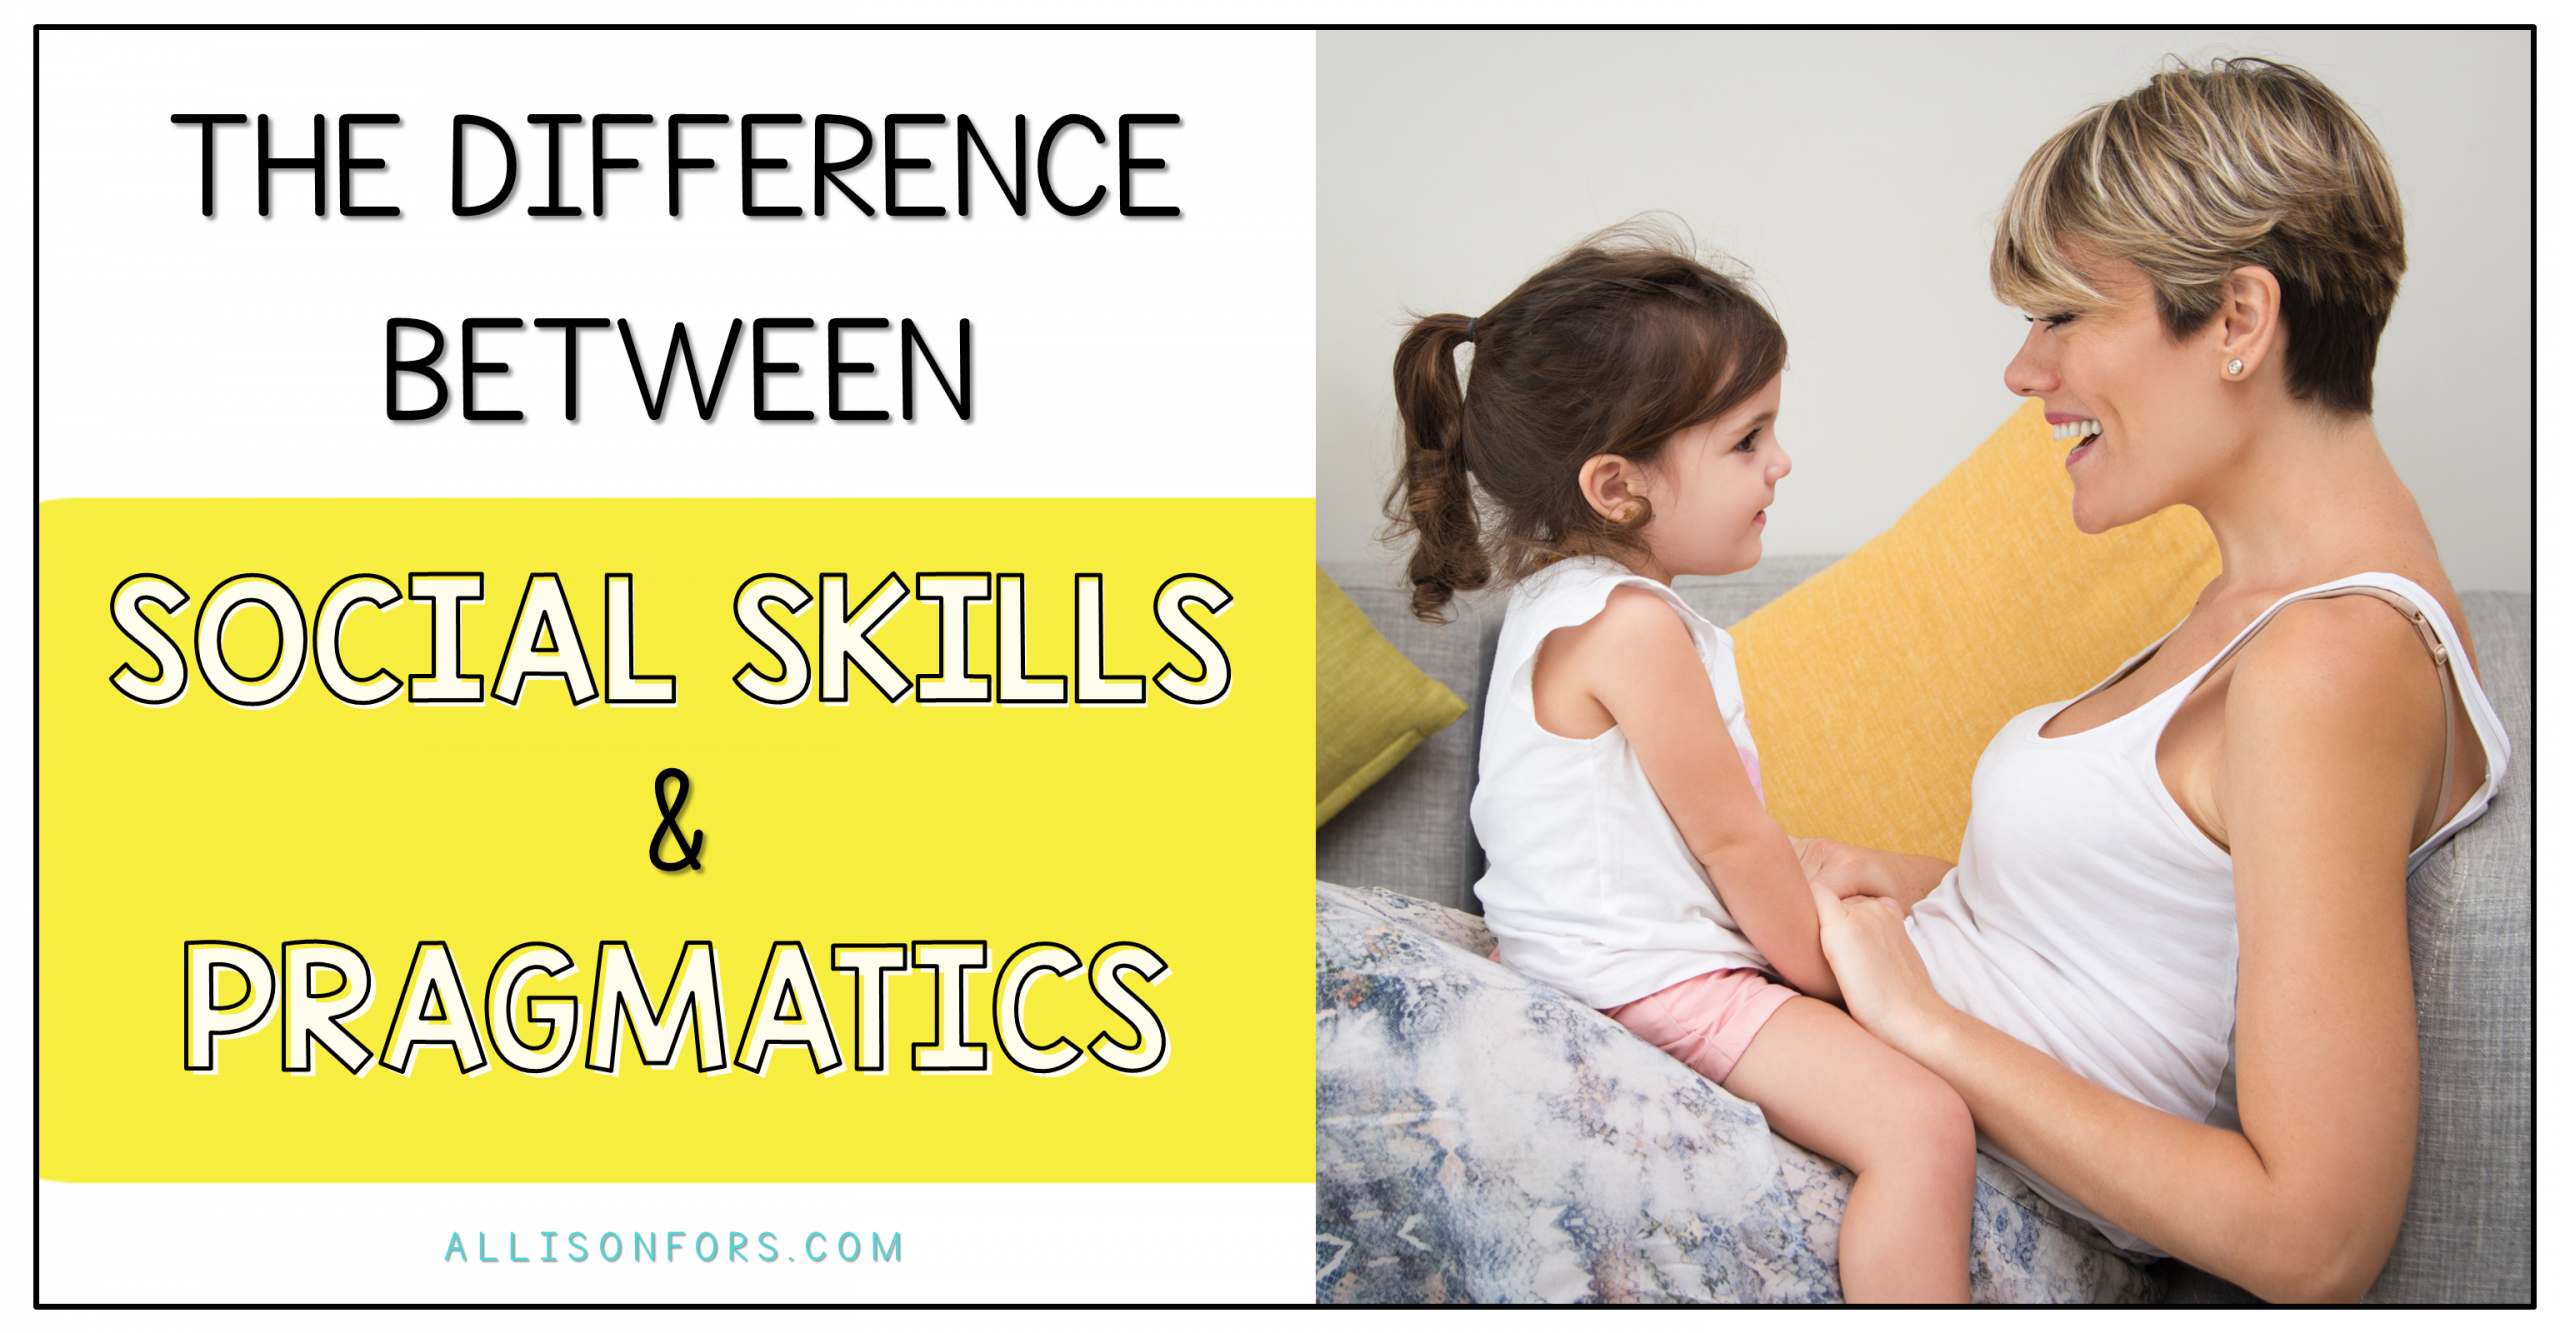 The Difference Between Social Skills and Pragmatics